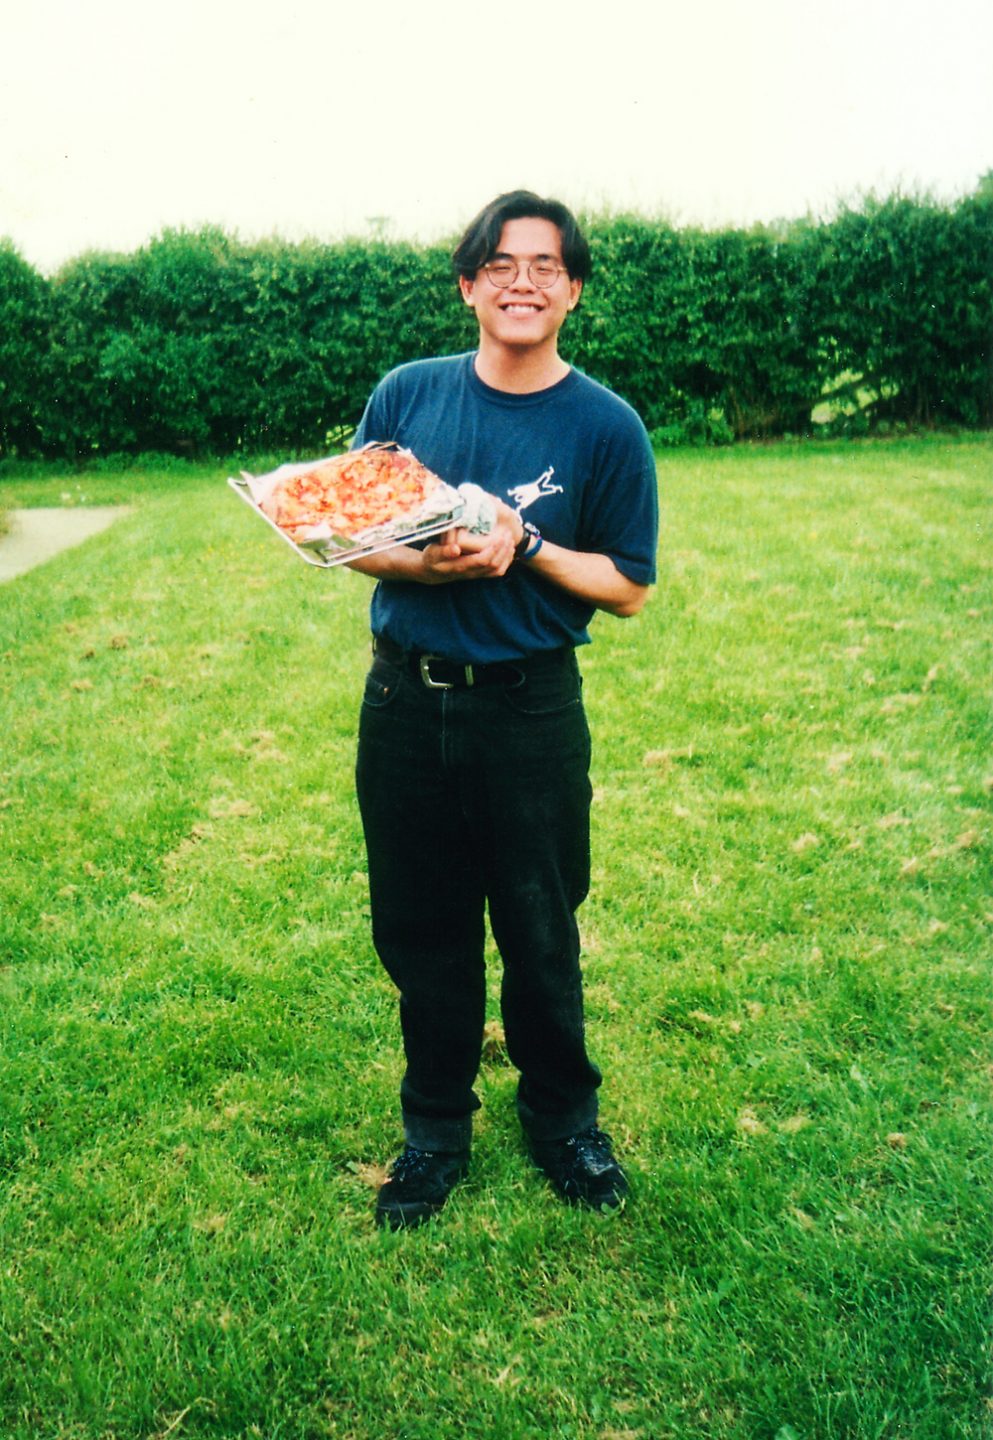 Christopher Tan, during his university days, making pizza for everyone while on a weekend away with the Christian Union folks.